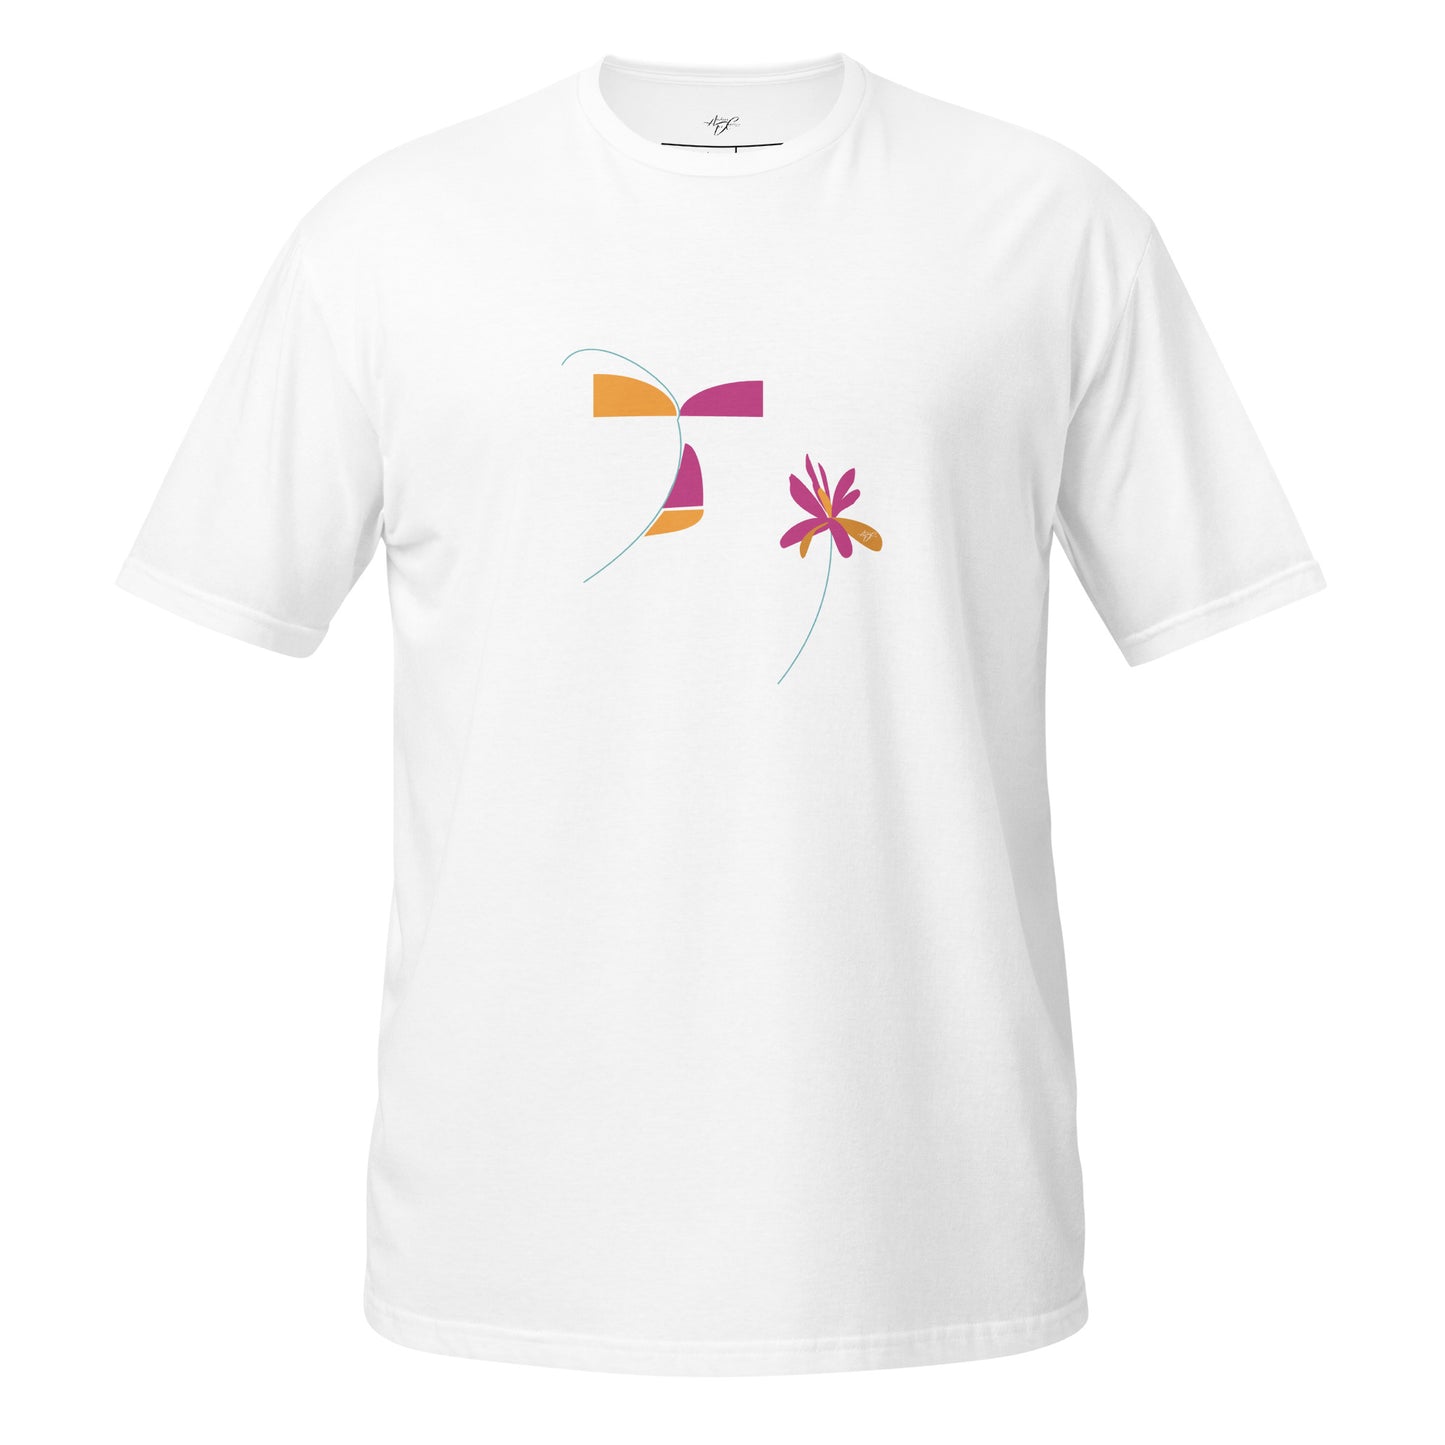 Enigmatic Aroma - Abstract Male & Flower Design Tee by Le Boulanger